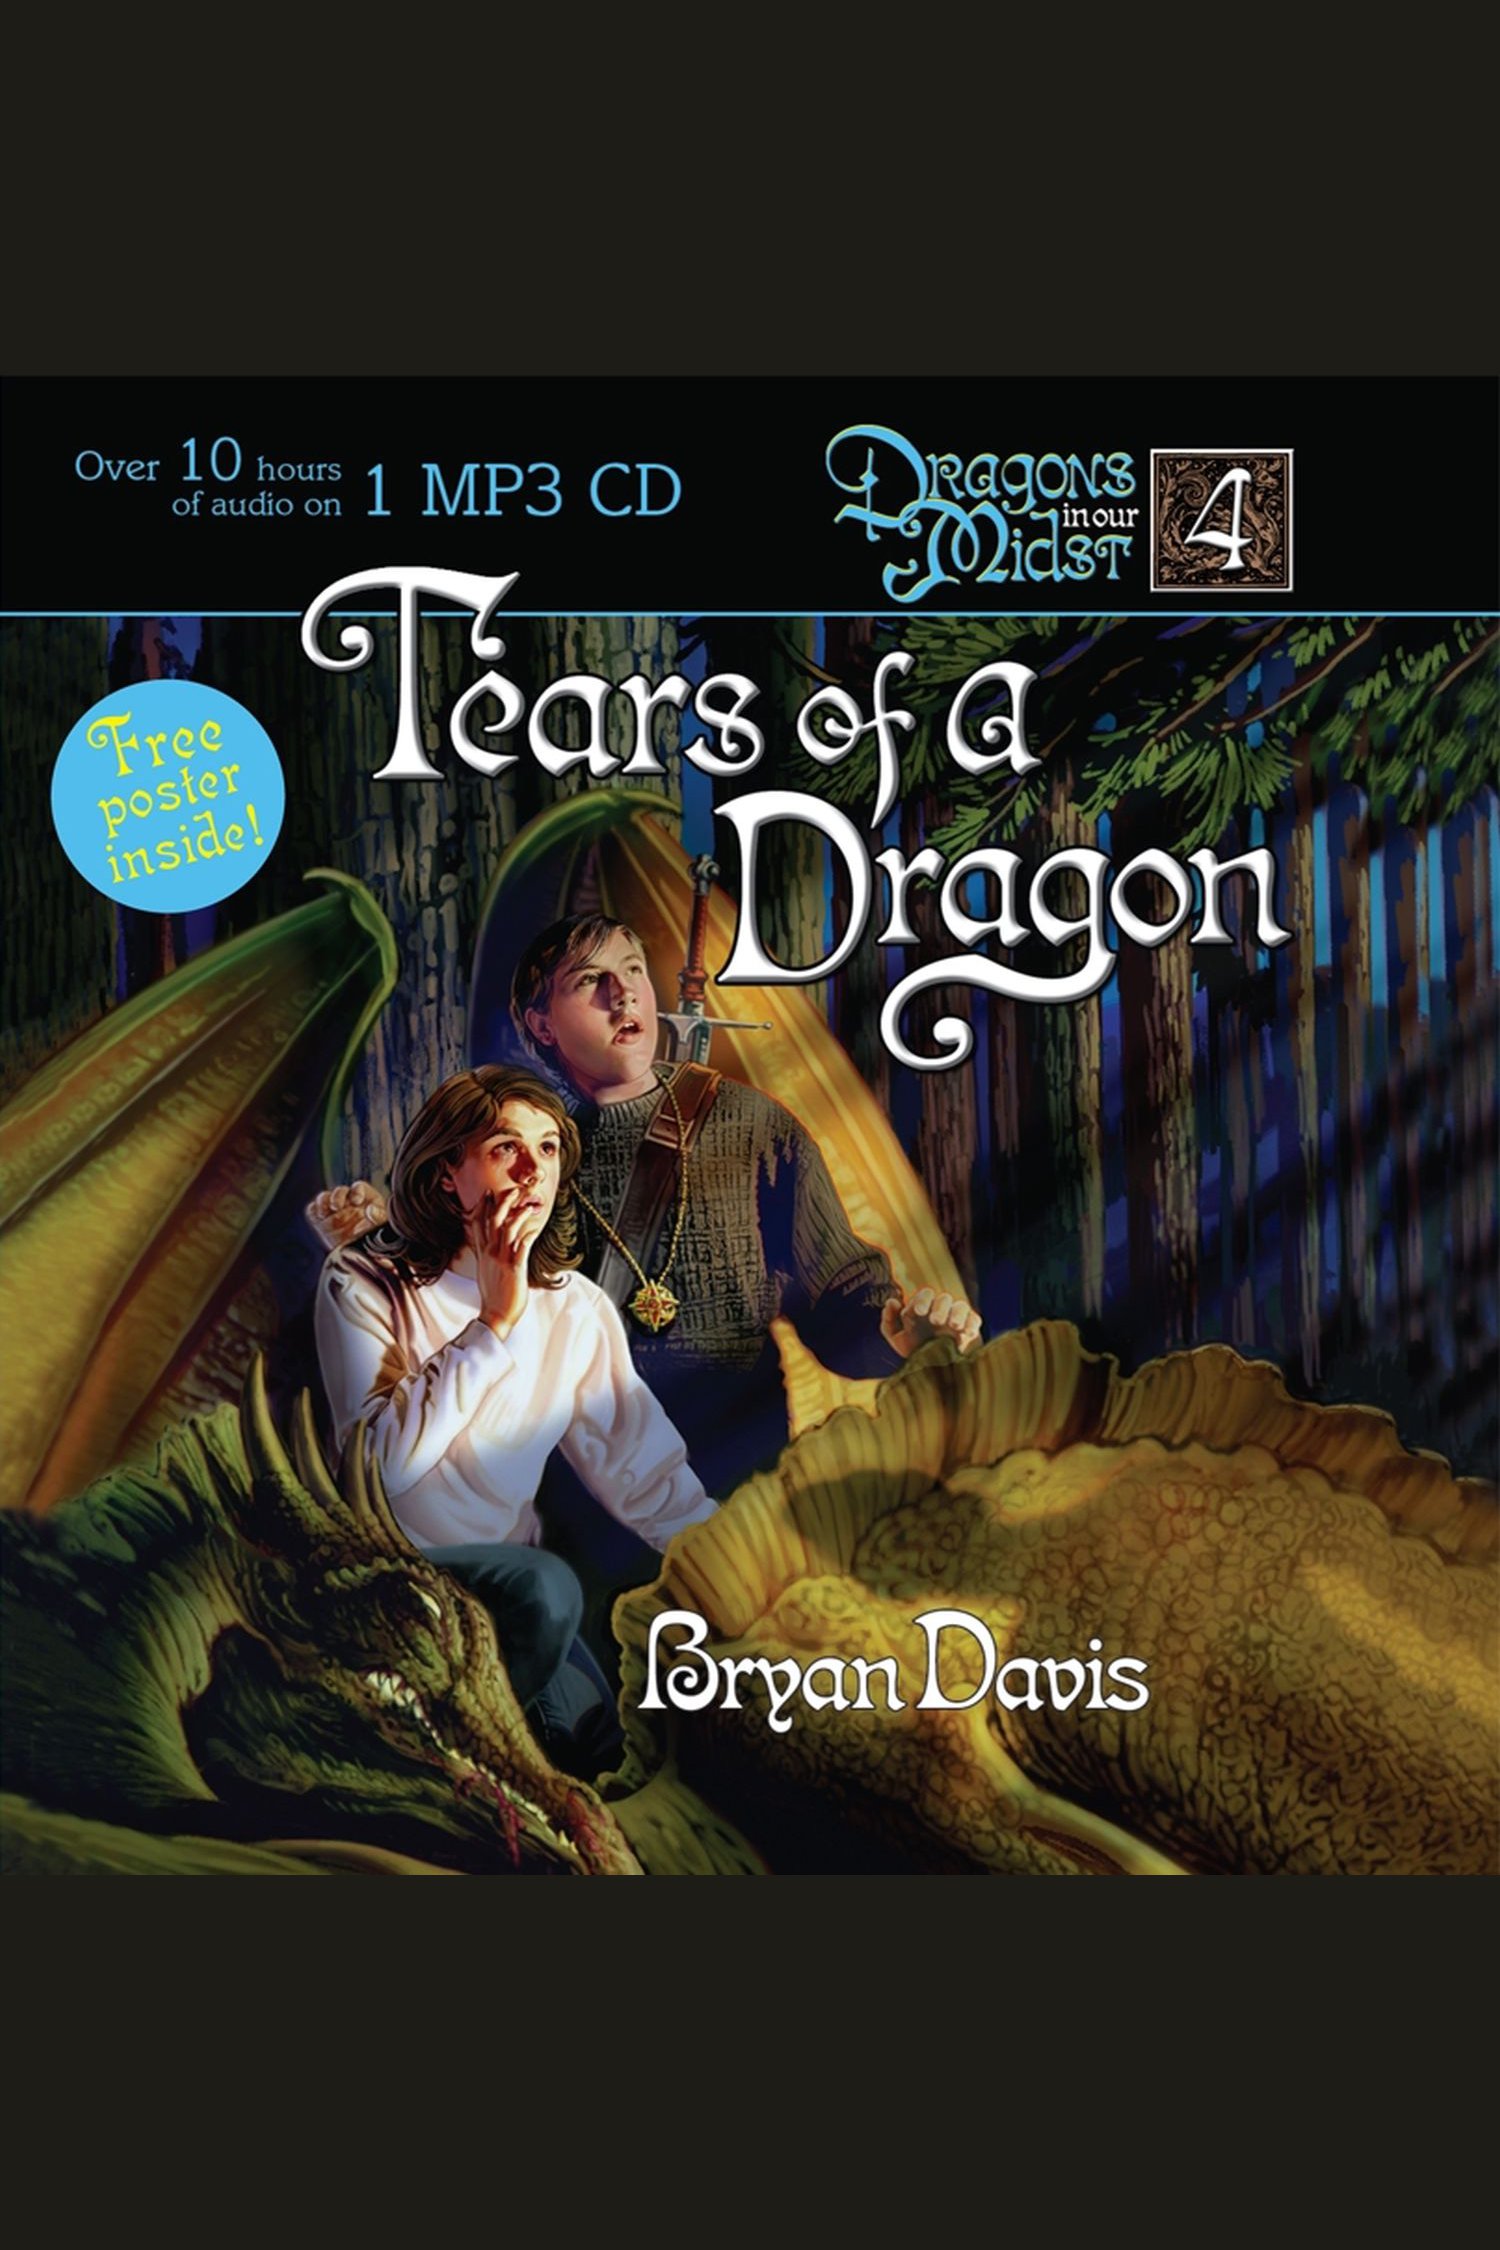 Tears of a dragon cover image